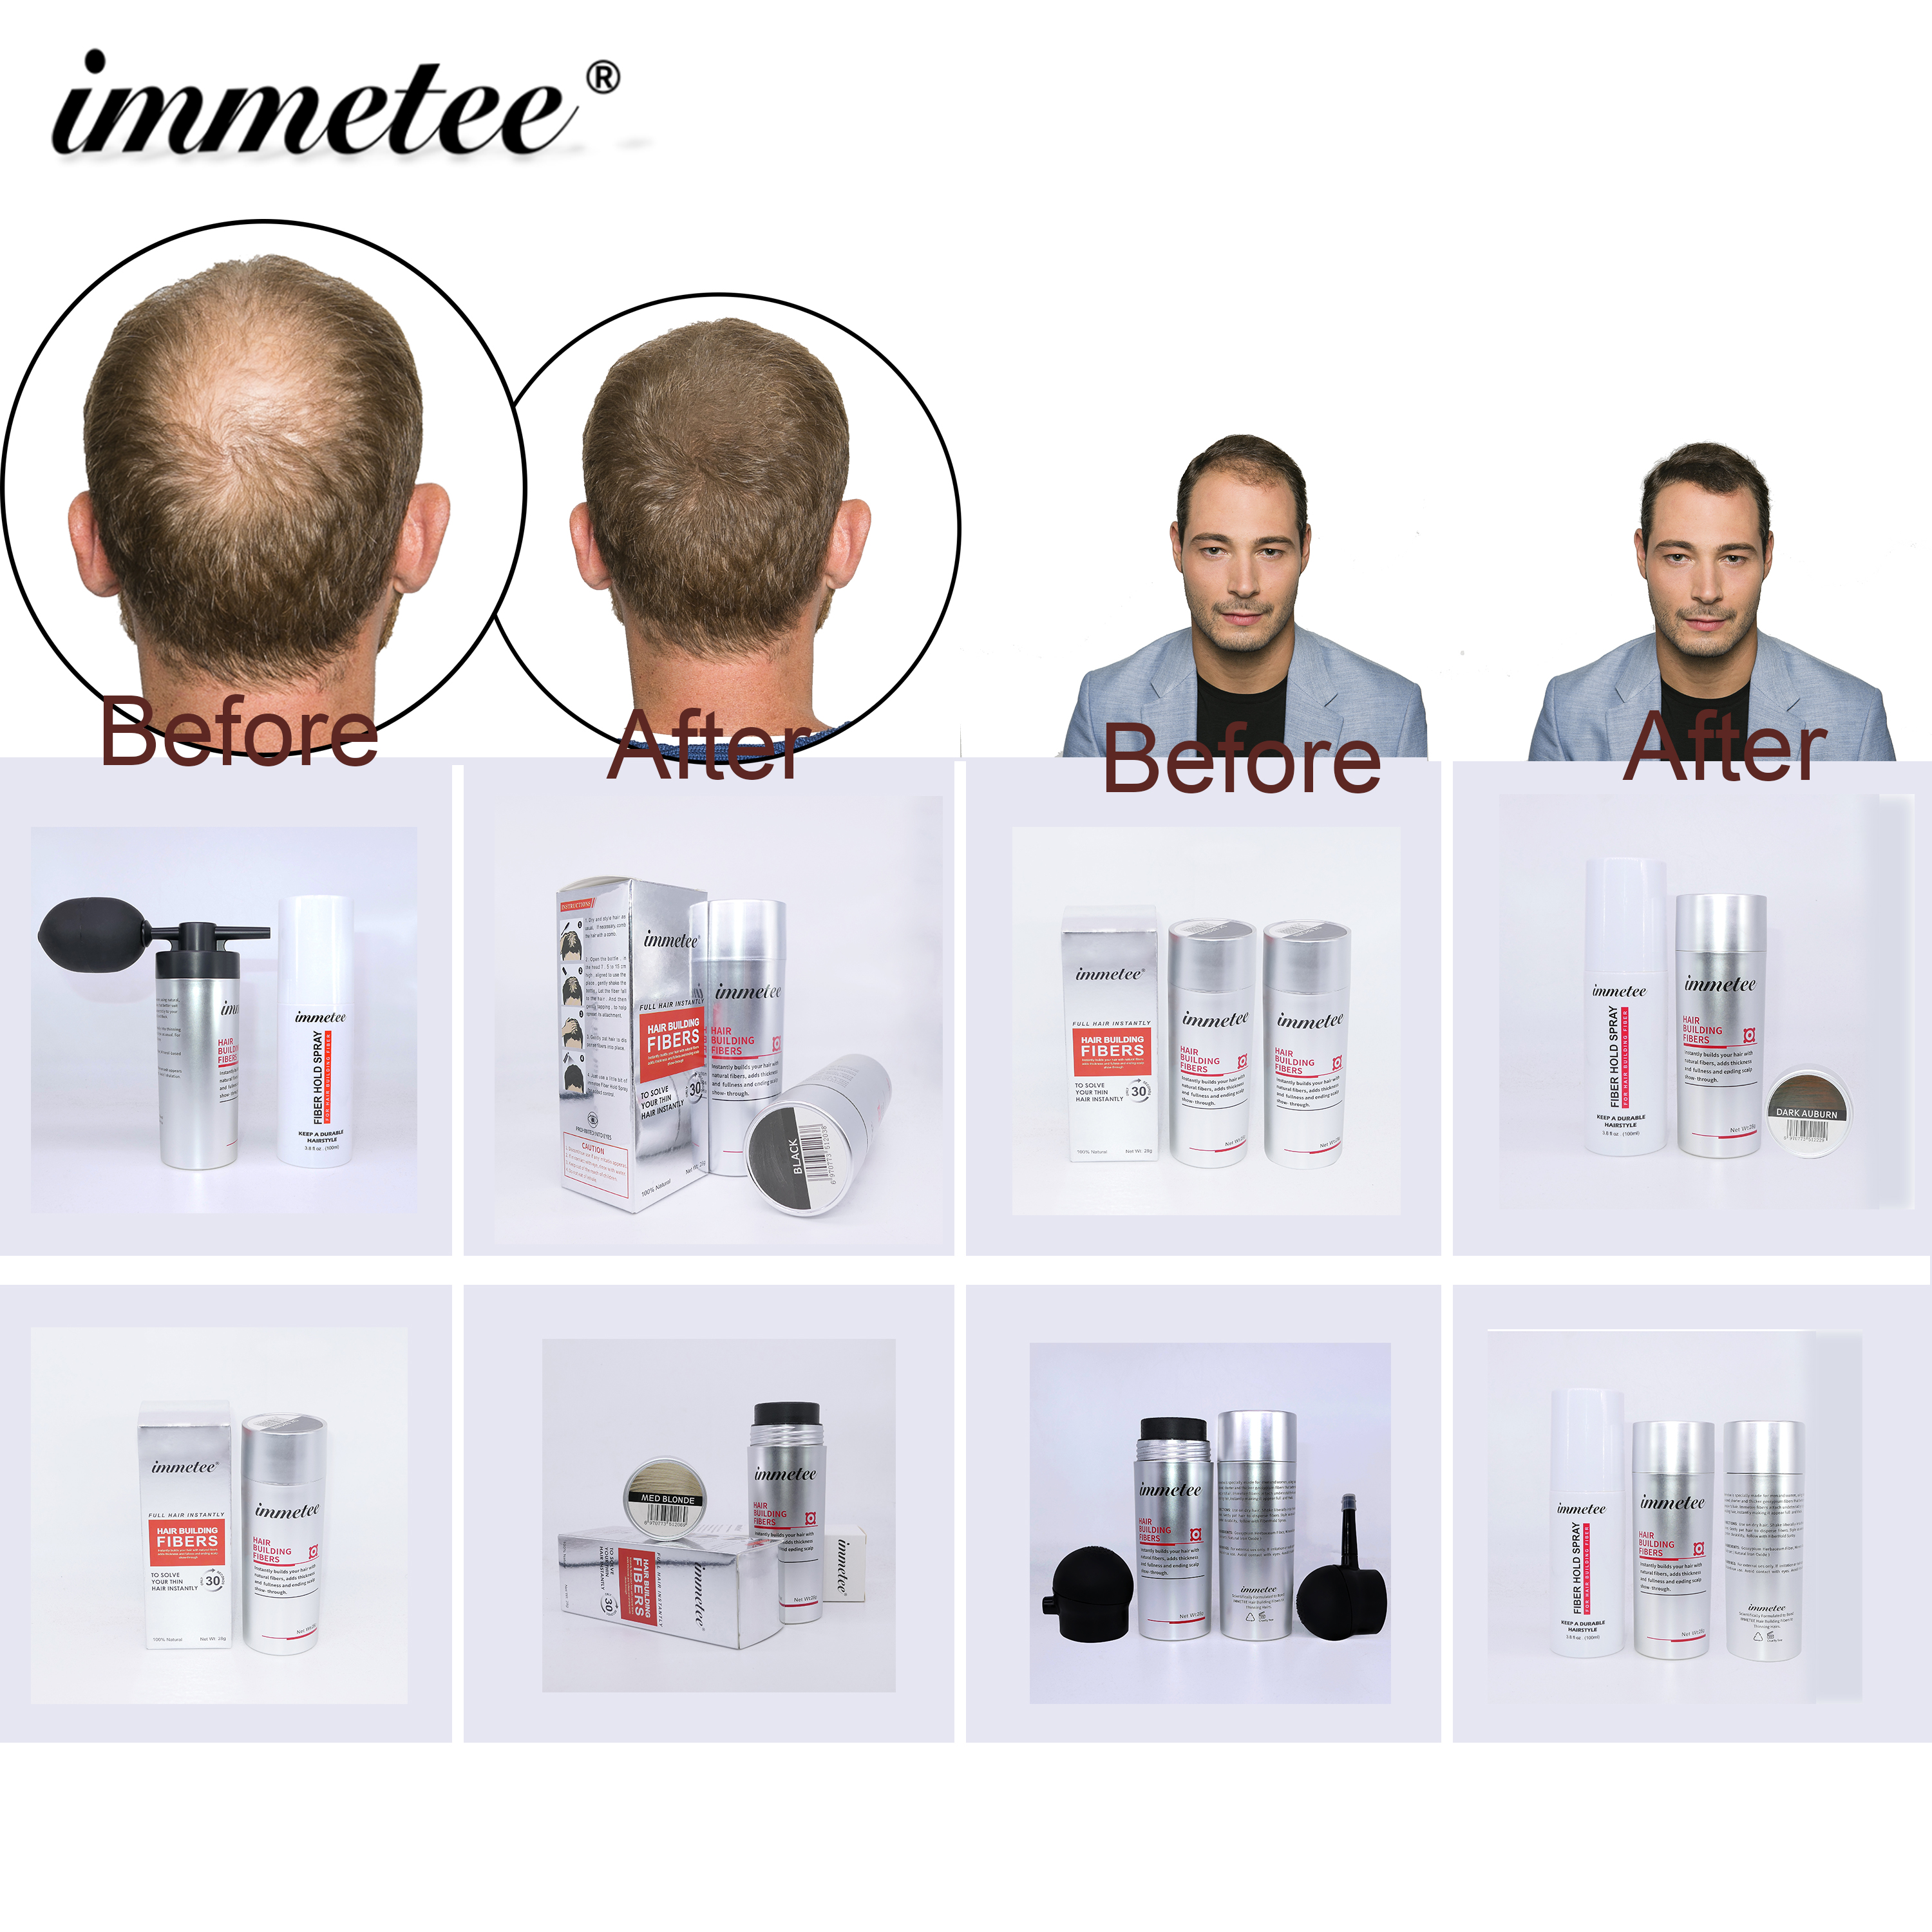 immetee 28g Instantly Hair Growth Fiber Protein Hair Regrowth Treatment Hair Loss & Bald Patch Fiber 12 Color